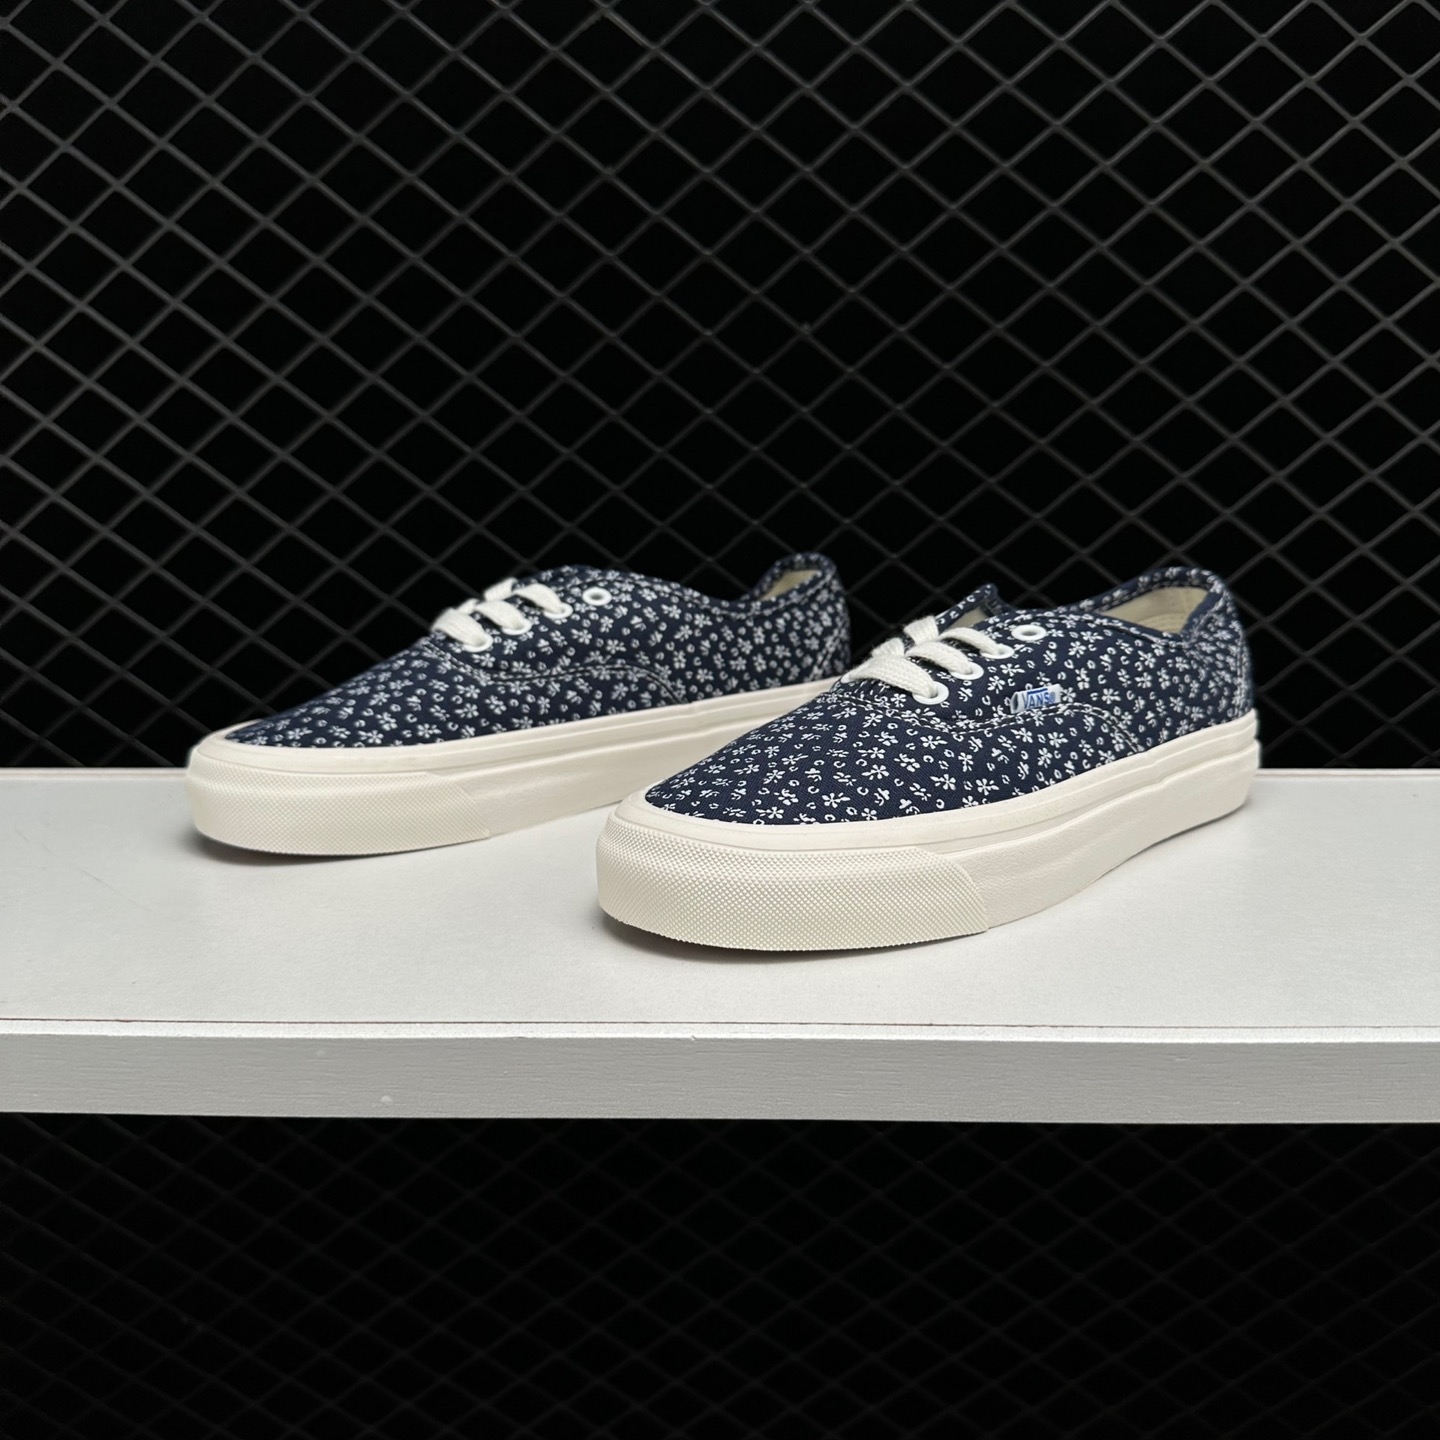 Vans Style 44 Low Tops - Casual Skateboarding Shoes in Blue White - Unisex VN0A7Q5CNVY